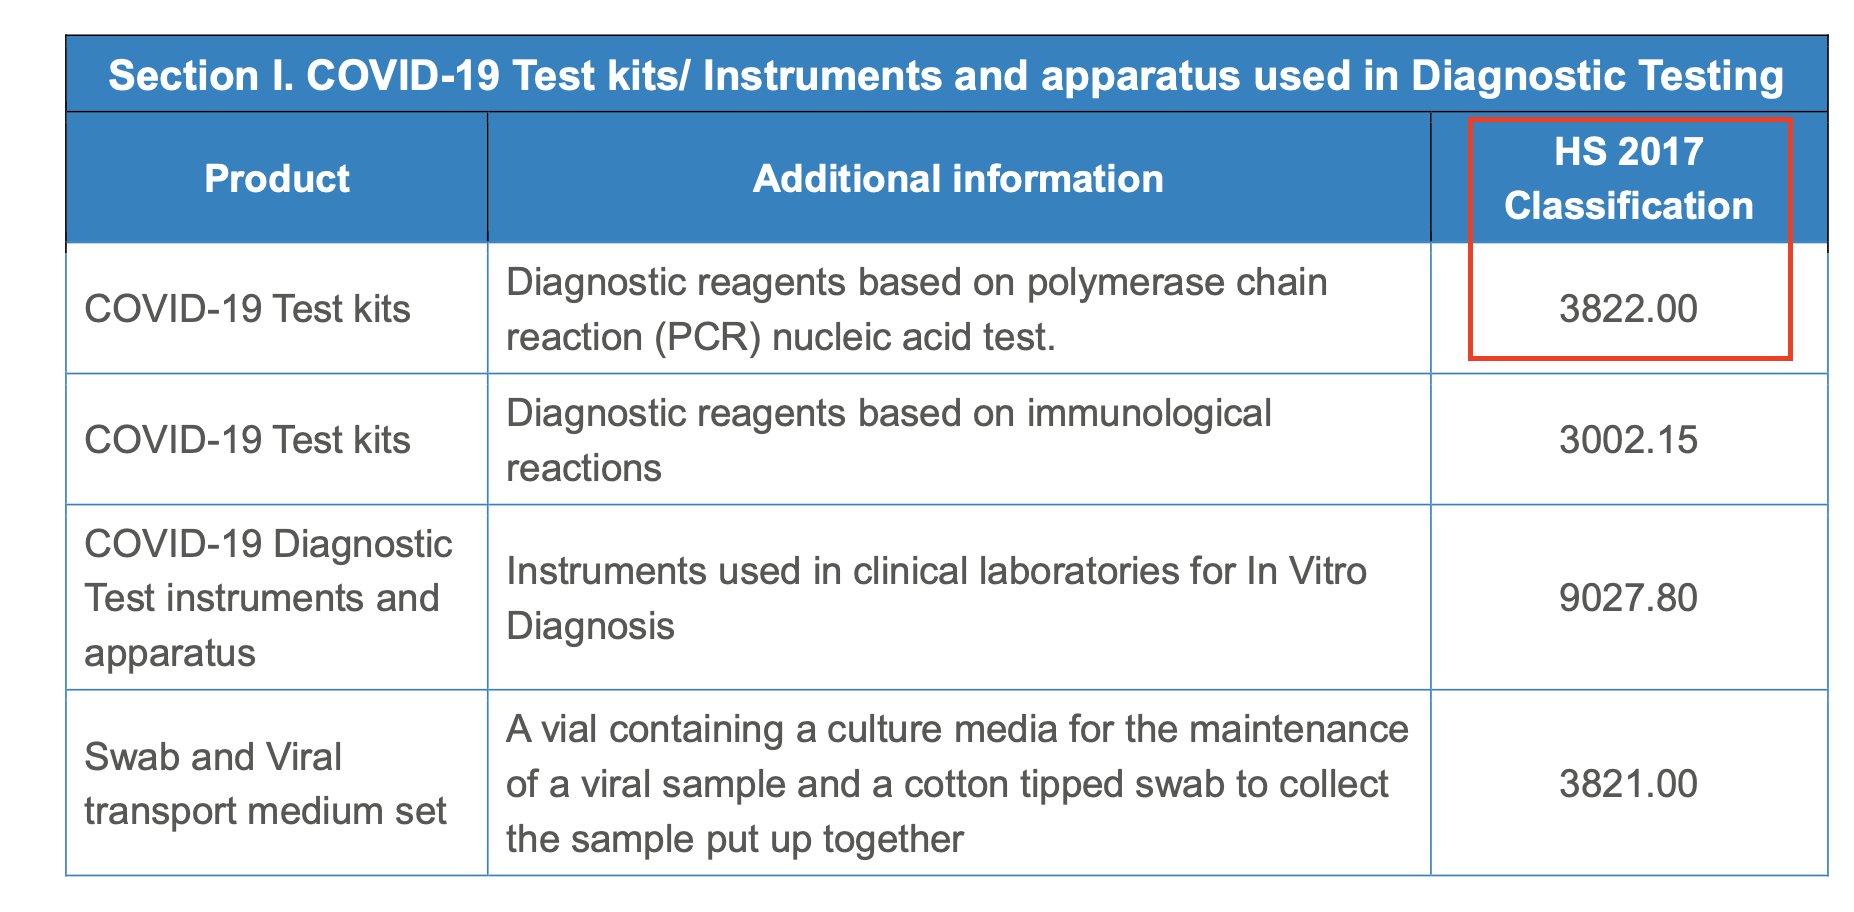 HS classification for COVID-19 test kits